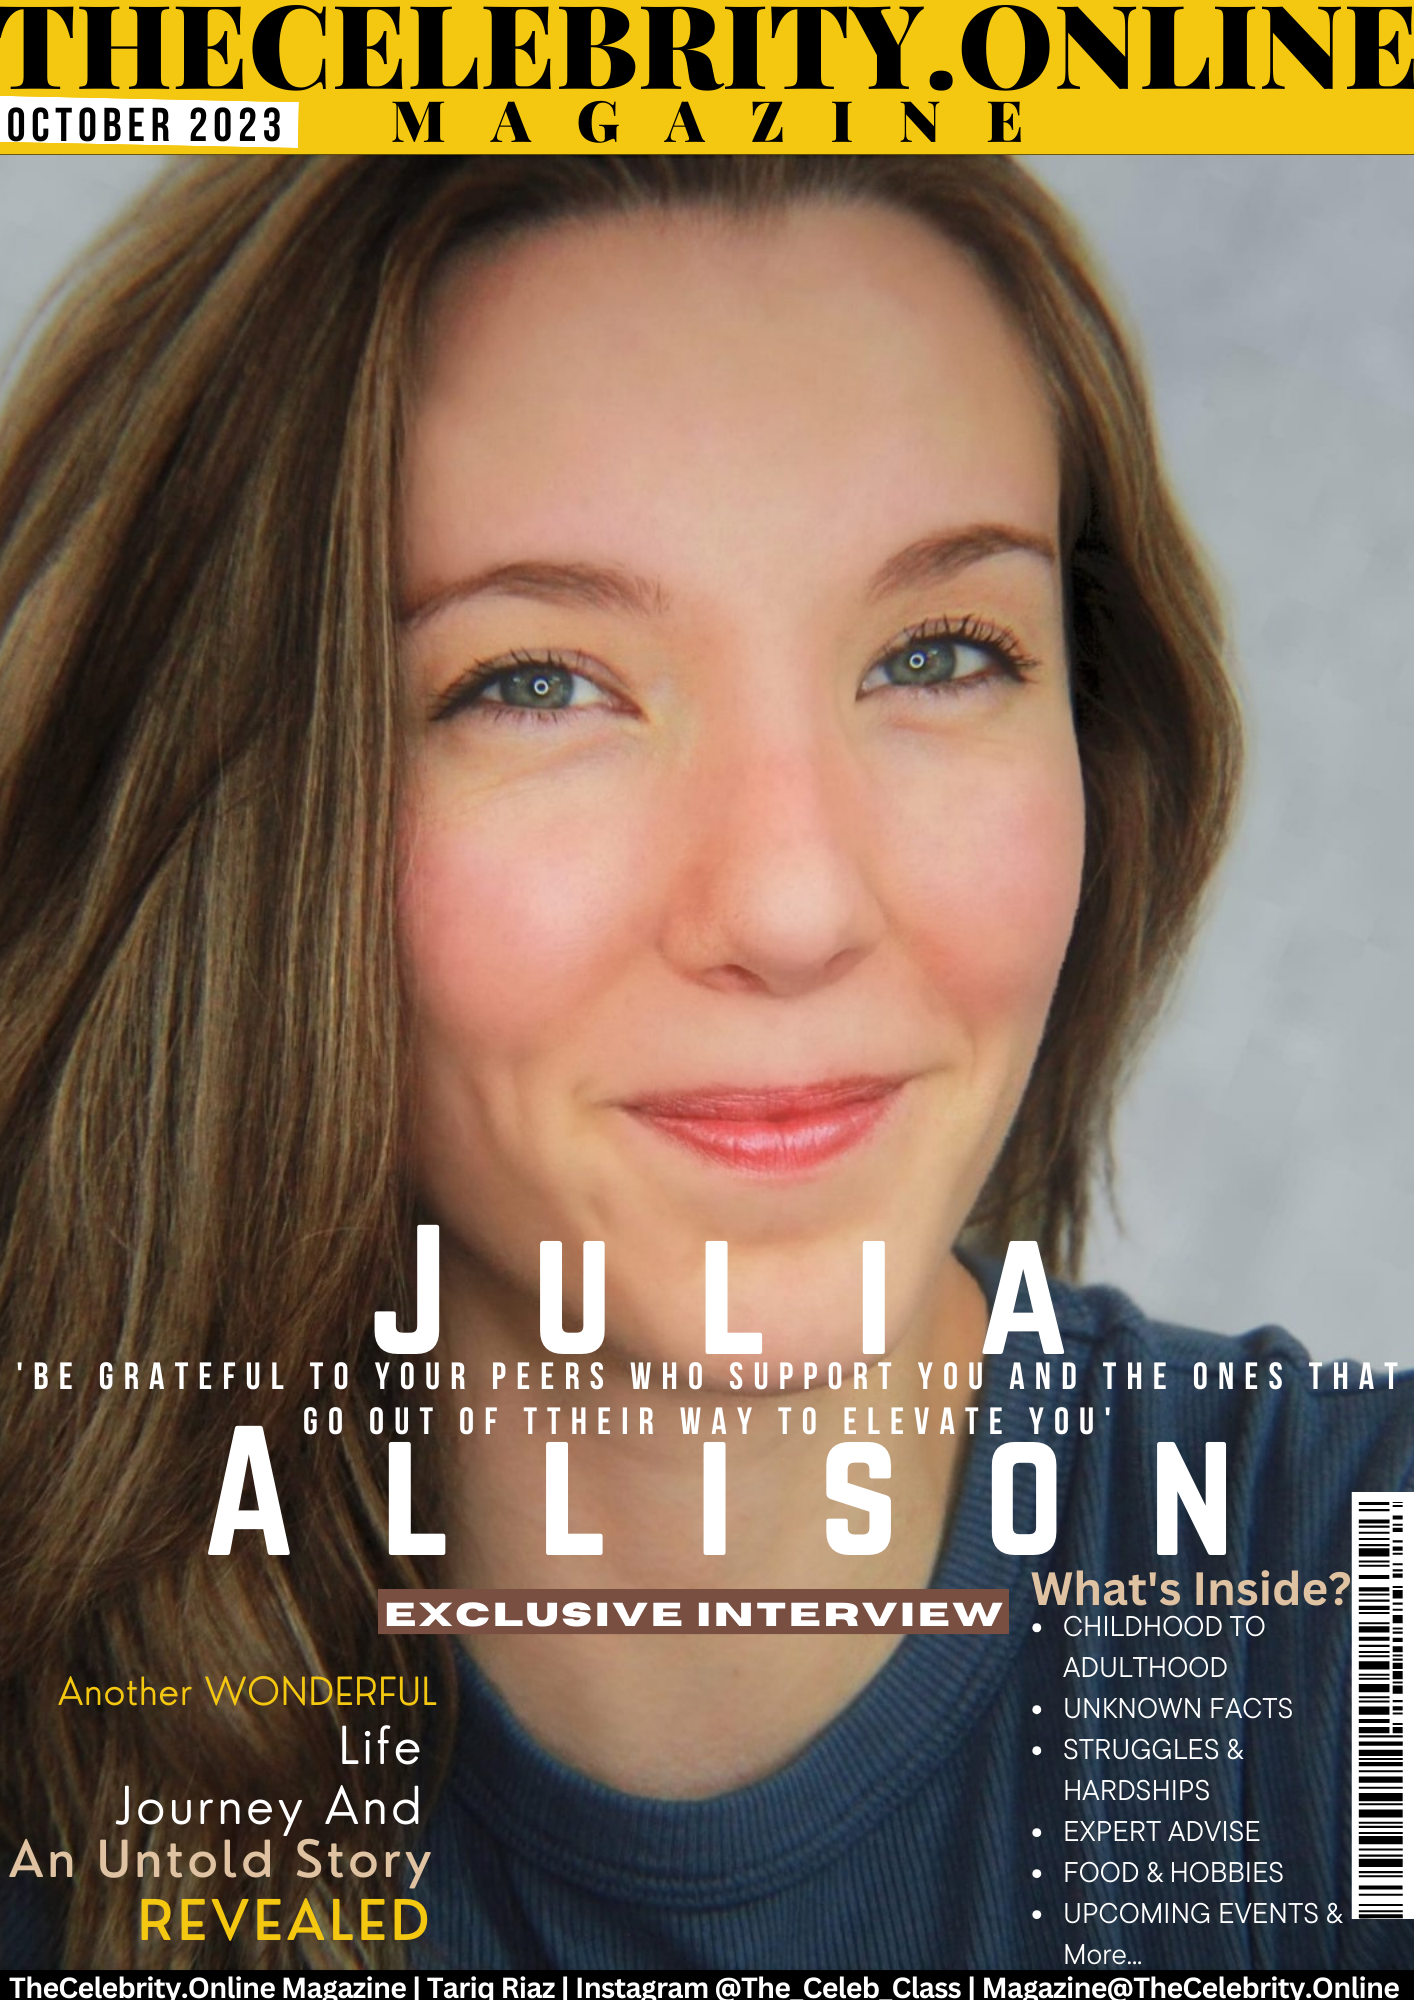 Julia Allison Exclusive Interview – ‘Be Grateful To Your Peers Who Support You And The Ones That Go Out Of Ttheir Way To Elevate You’